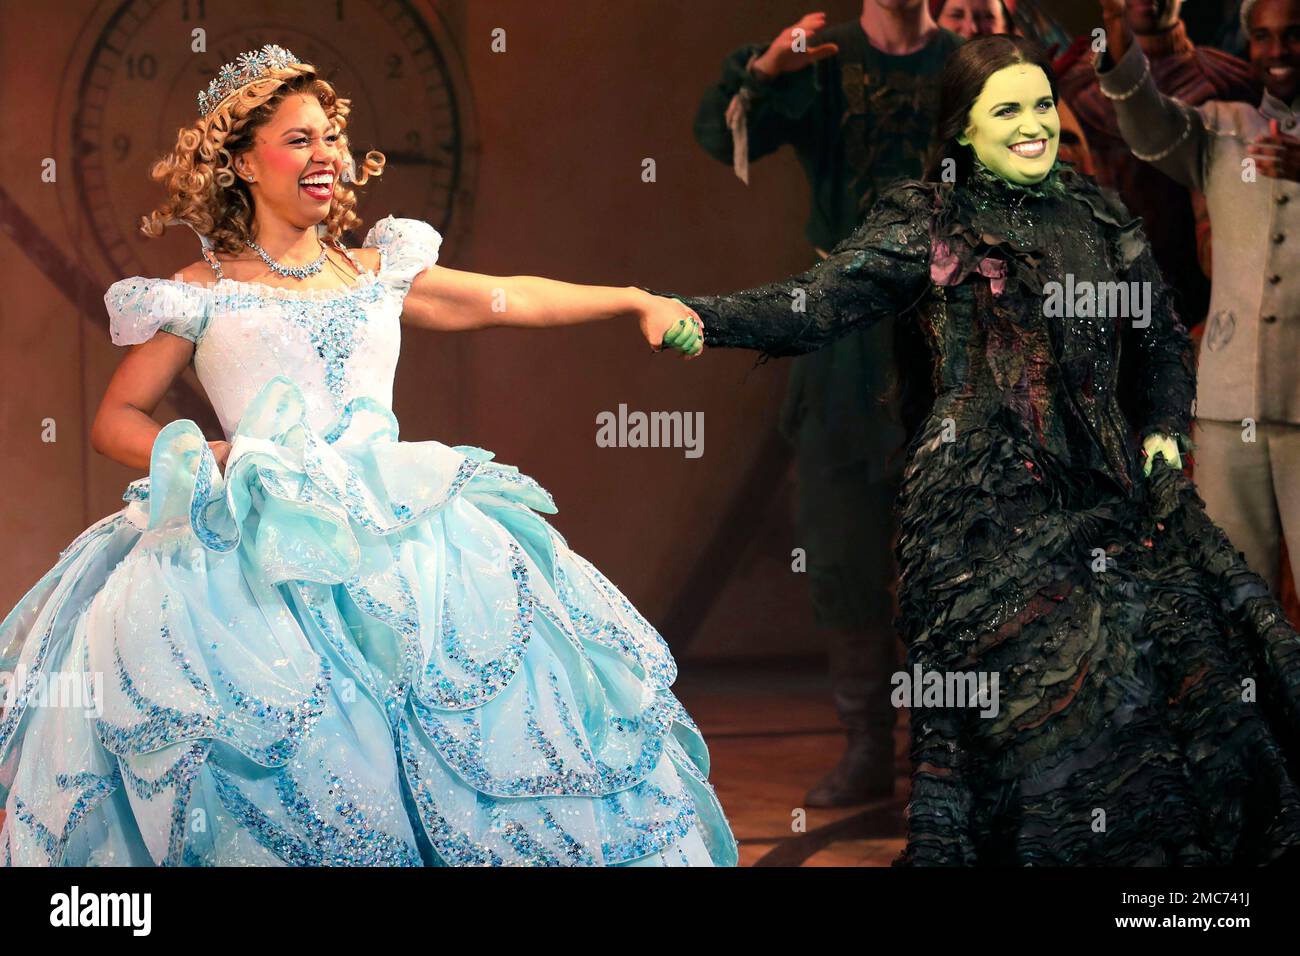 Actors Brittney Johnson, left, and Lindsay Pearce hold hands on stage  during the curtain call of the musical "Wicked" at the Gershwin Theatre on  Monday, Feb. 14, 2022, in New York. (Photo